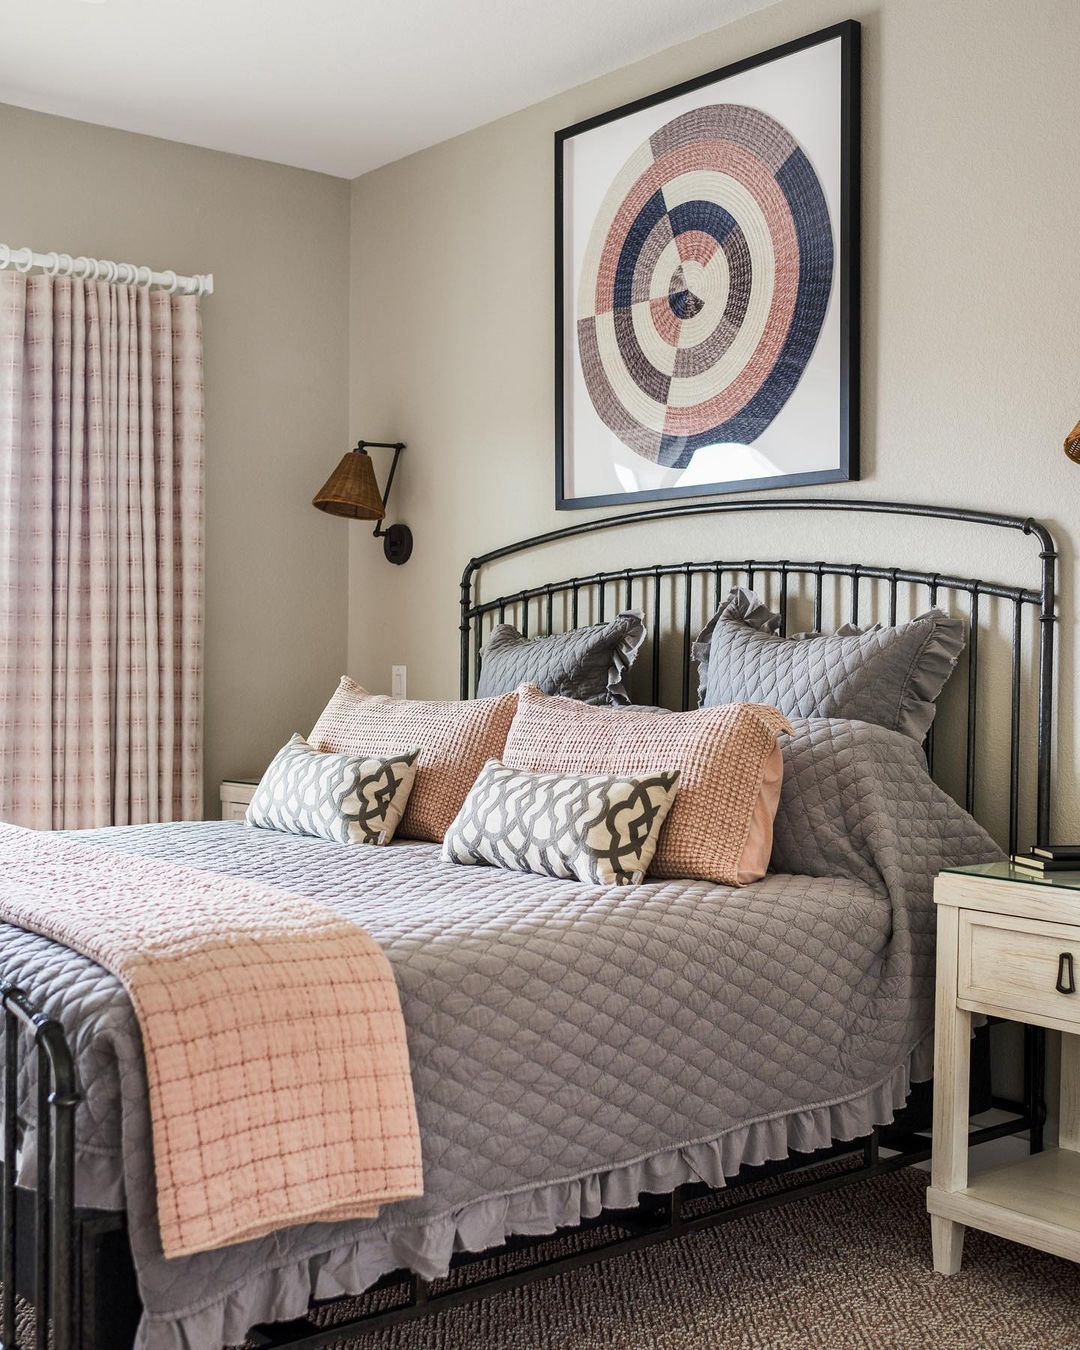 Targeted Style: Metal Bed Frame with Geometric Influence